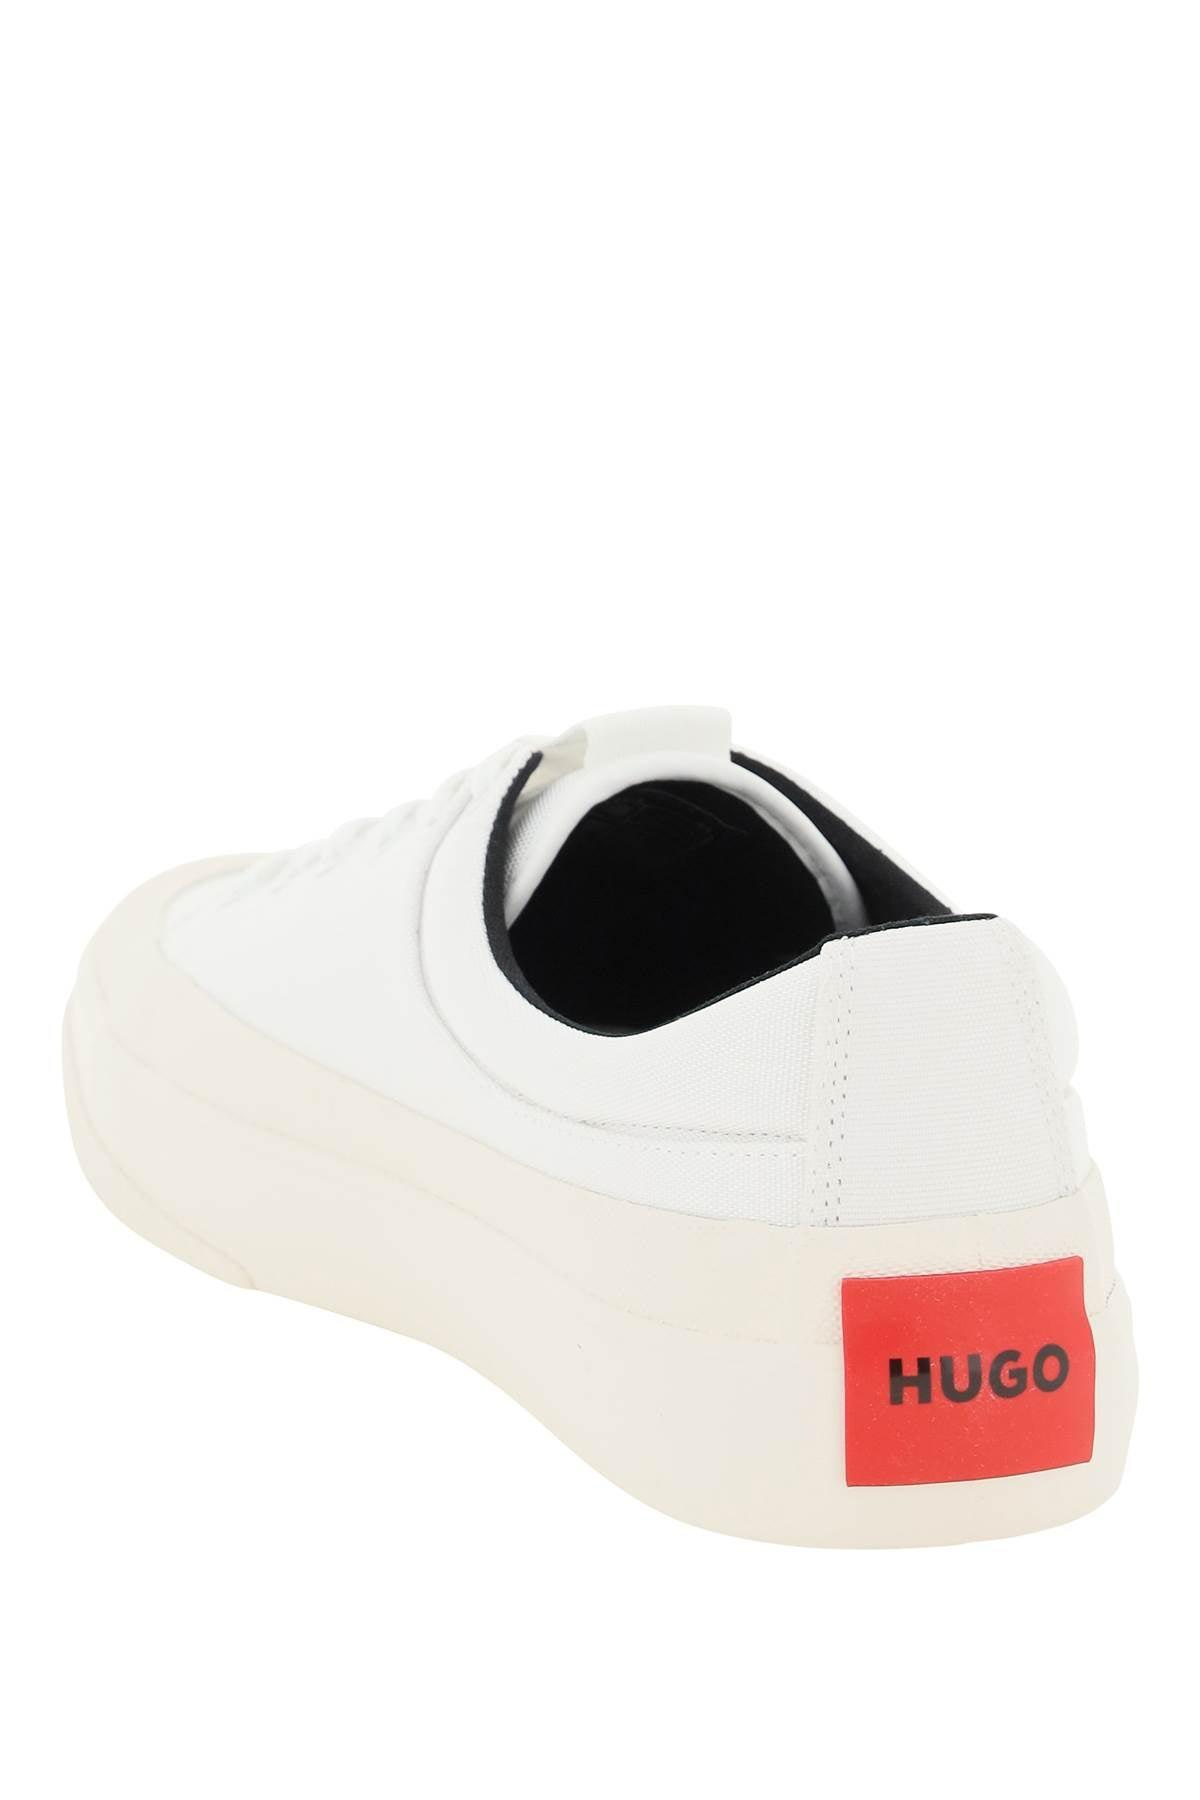 HUGO Cotton Low-top Sneakers in White for Men | Lyst